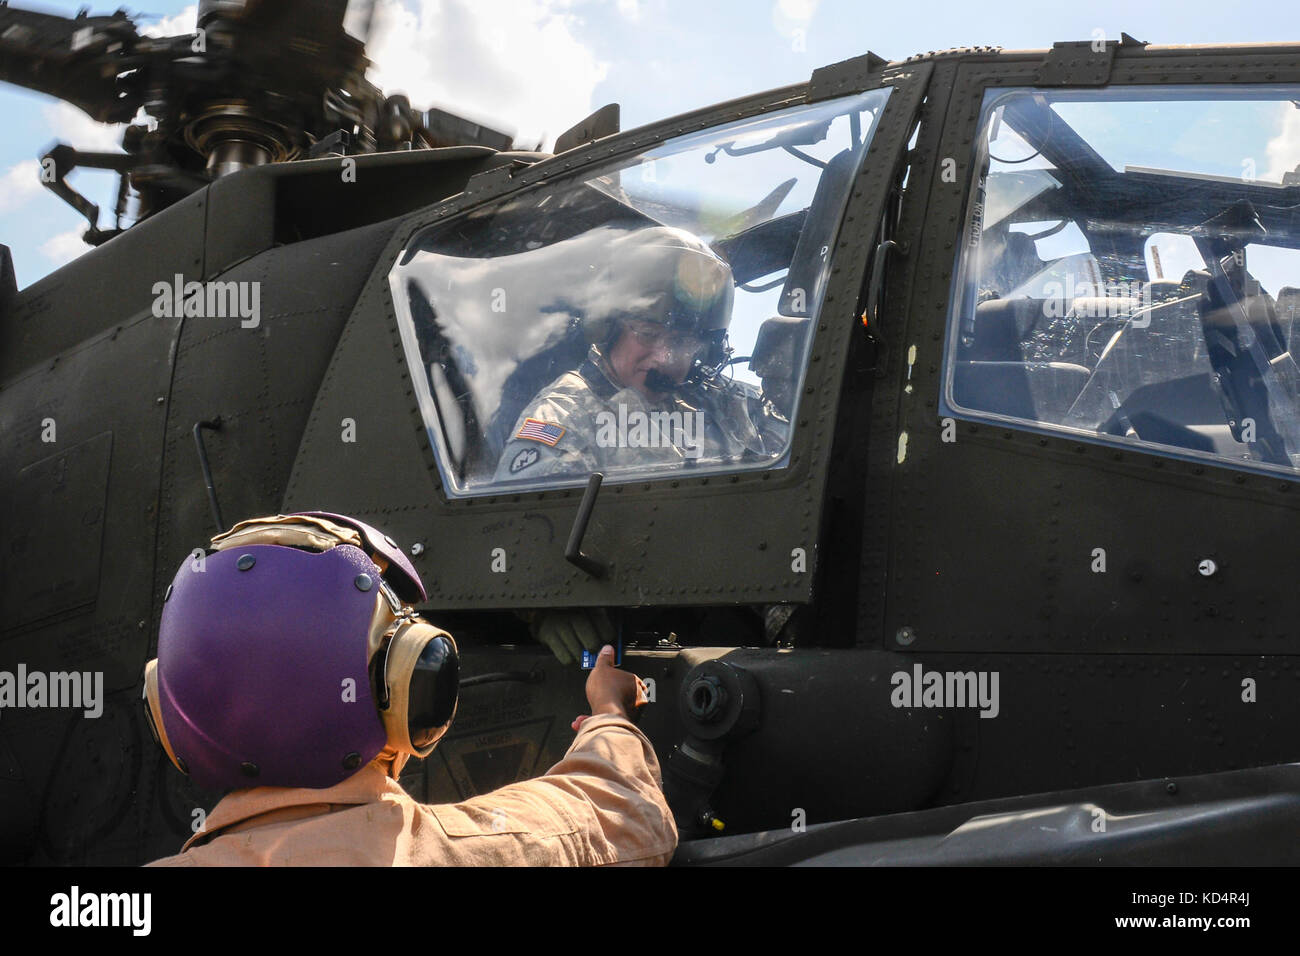 A U.S. Army AH-64 Apache pilot pays for fuel which is provided by U.S. Marines assigned to 273rd Marine Wing Support Squadron, Air Operations Company, during forward air refueling point operations at McEntire Joint National Guard Base, S.C. on May 14, 2014. Elements of the South Carolina Air and Army National Guard and the U.S. Marines conduct joint operations which are crucial to the ongoing success of operational readiness and deployments around the world.  (U.S. Air National Guard photo by Tech Sgt. Jorge Intriago/Released) Stock Photo